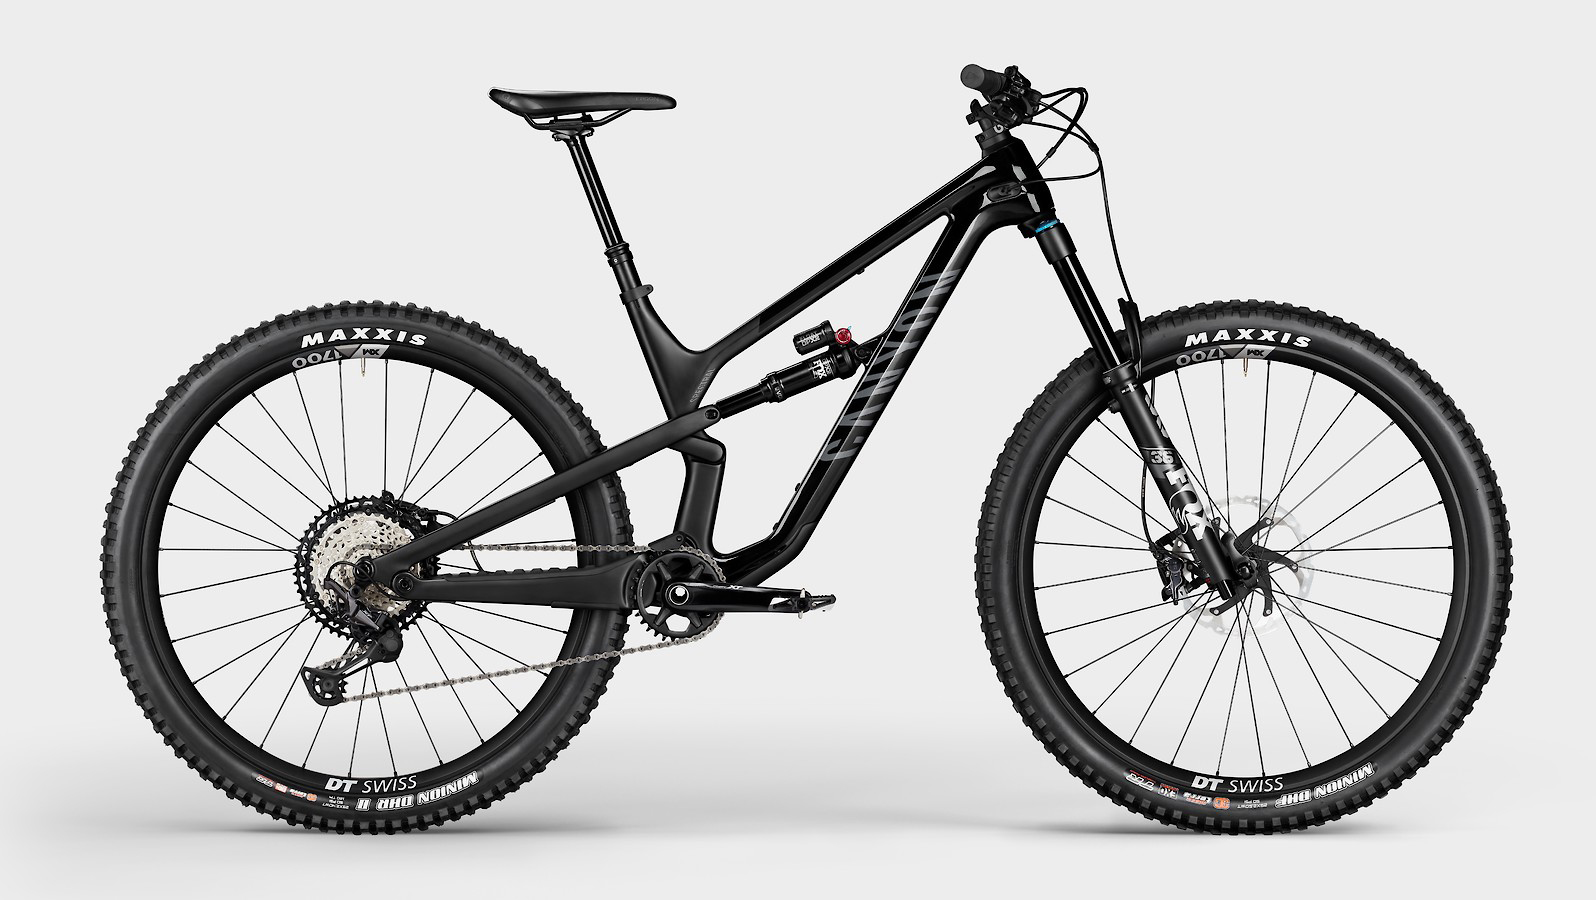 Blister reviews the Canyon Spectral 29